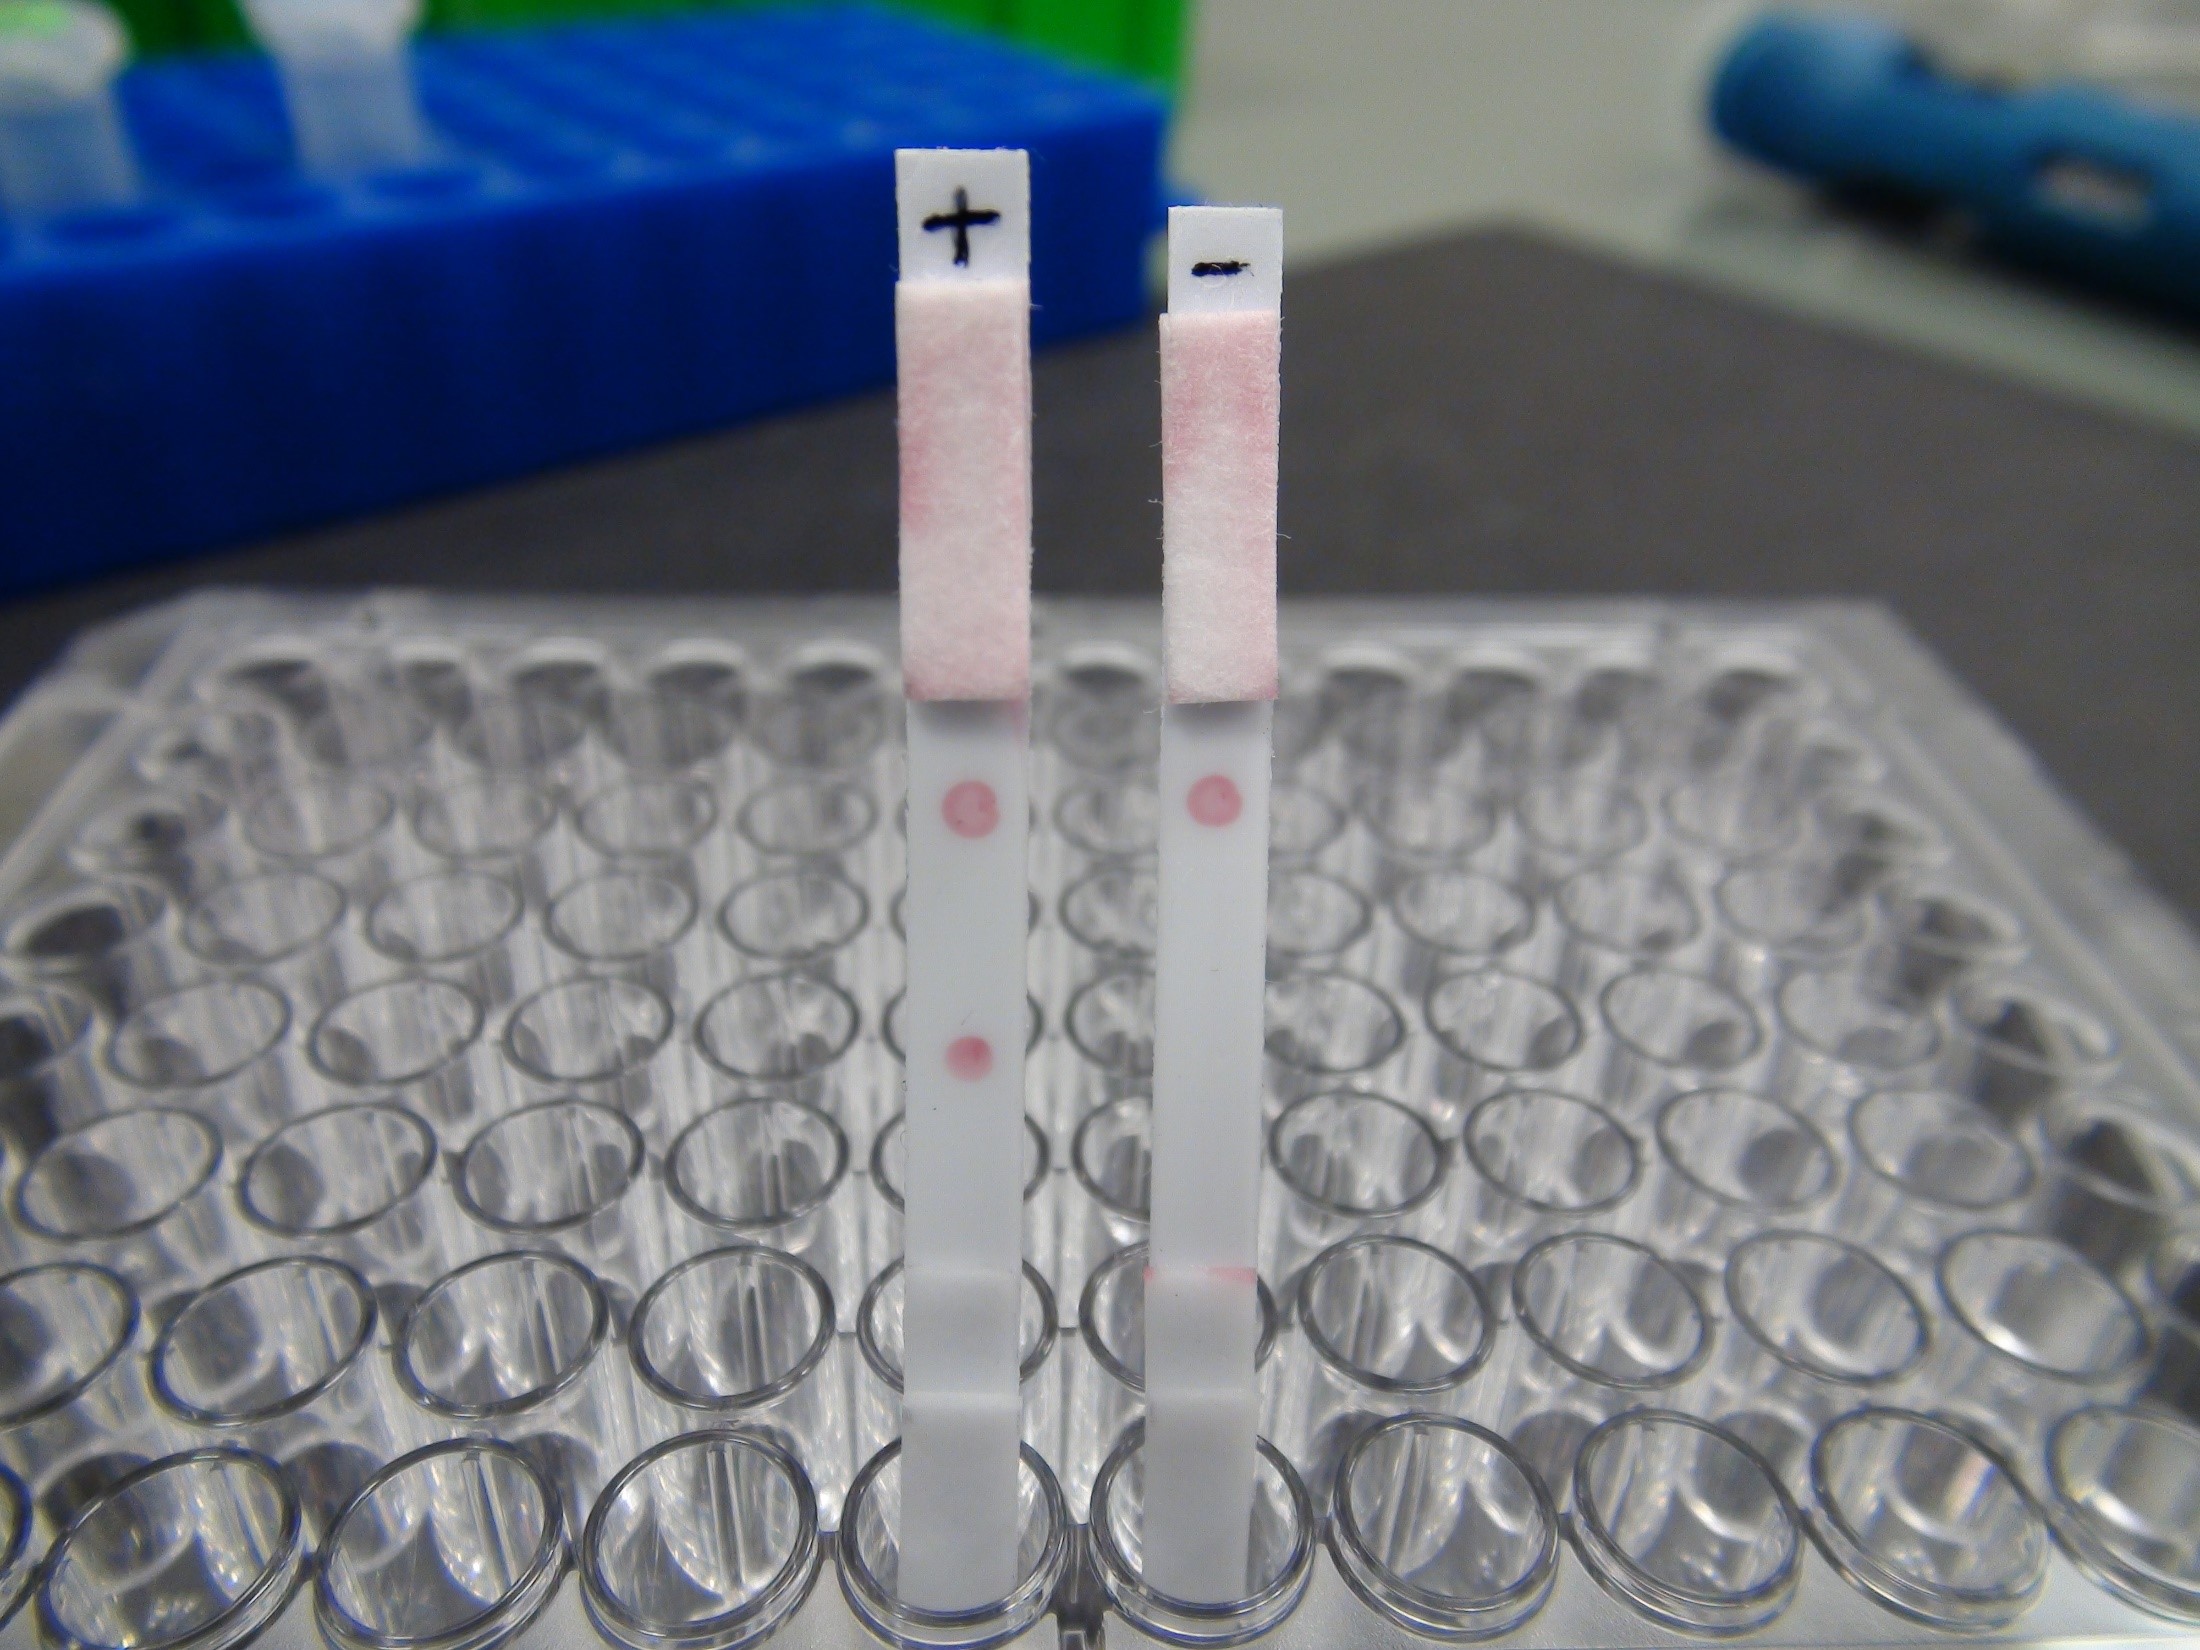 Lateral Flow – DNA probes as biosensors on test strips.